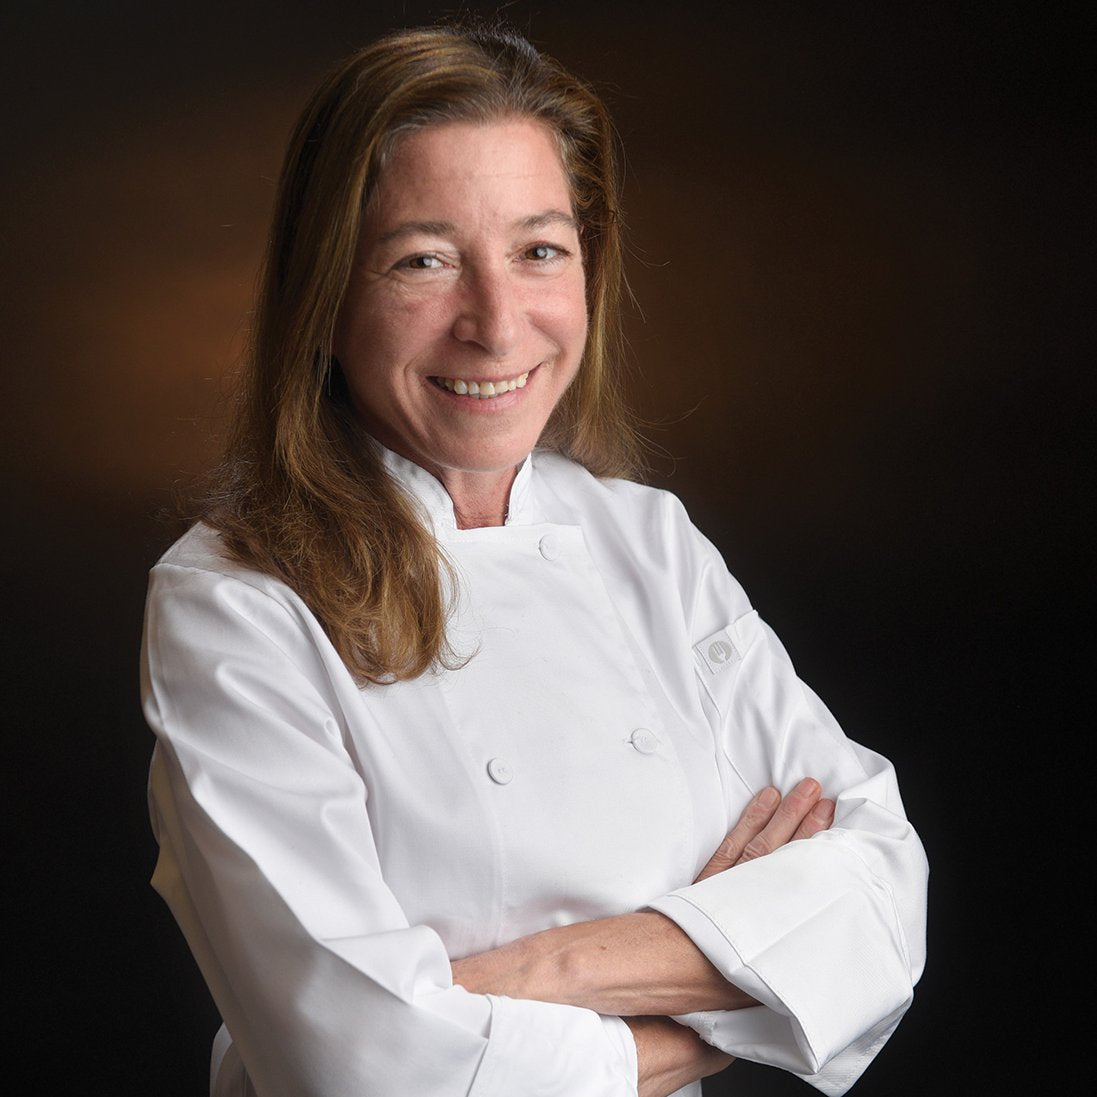 Consulting Chef Nancy Weiss: Sustainable, Healthy Food for All